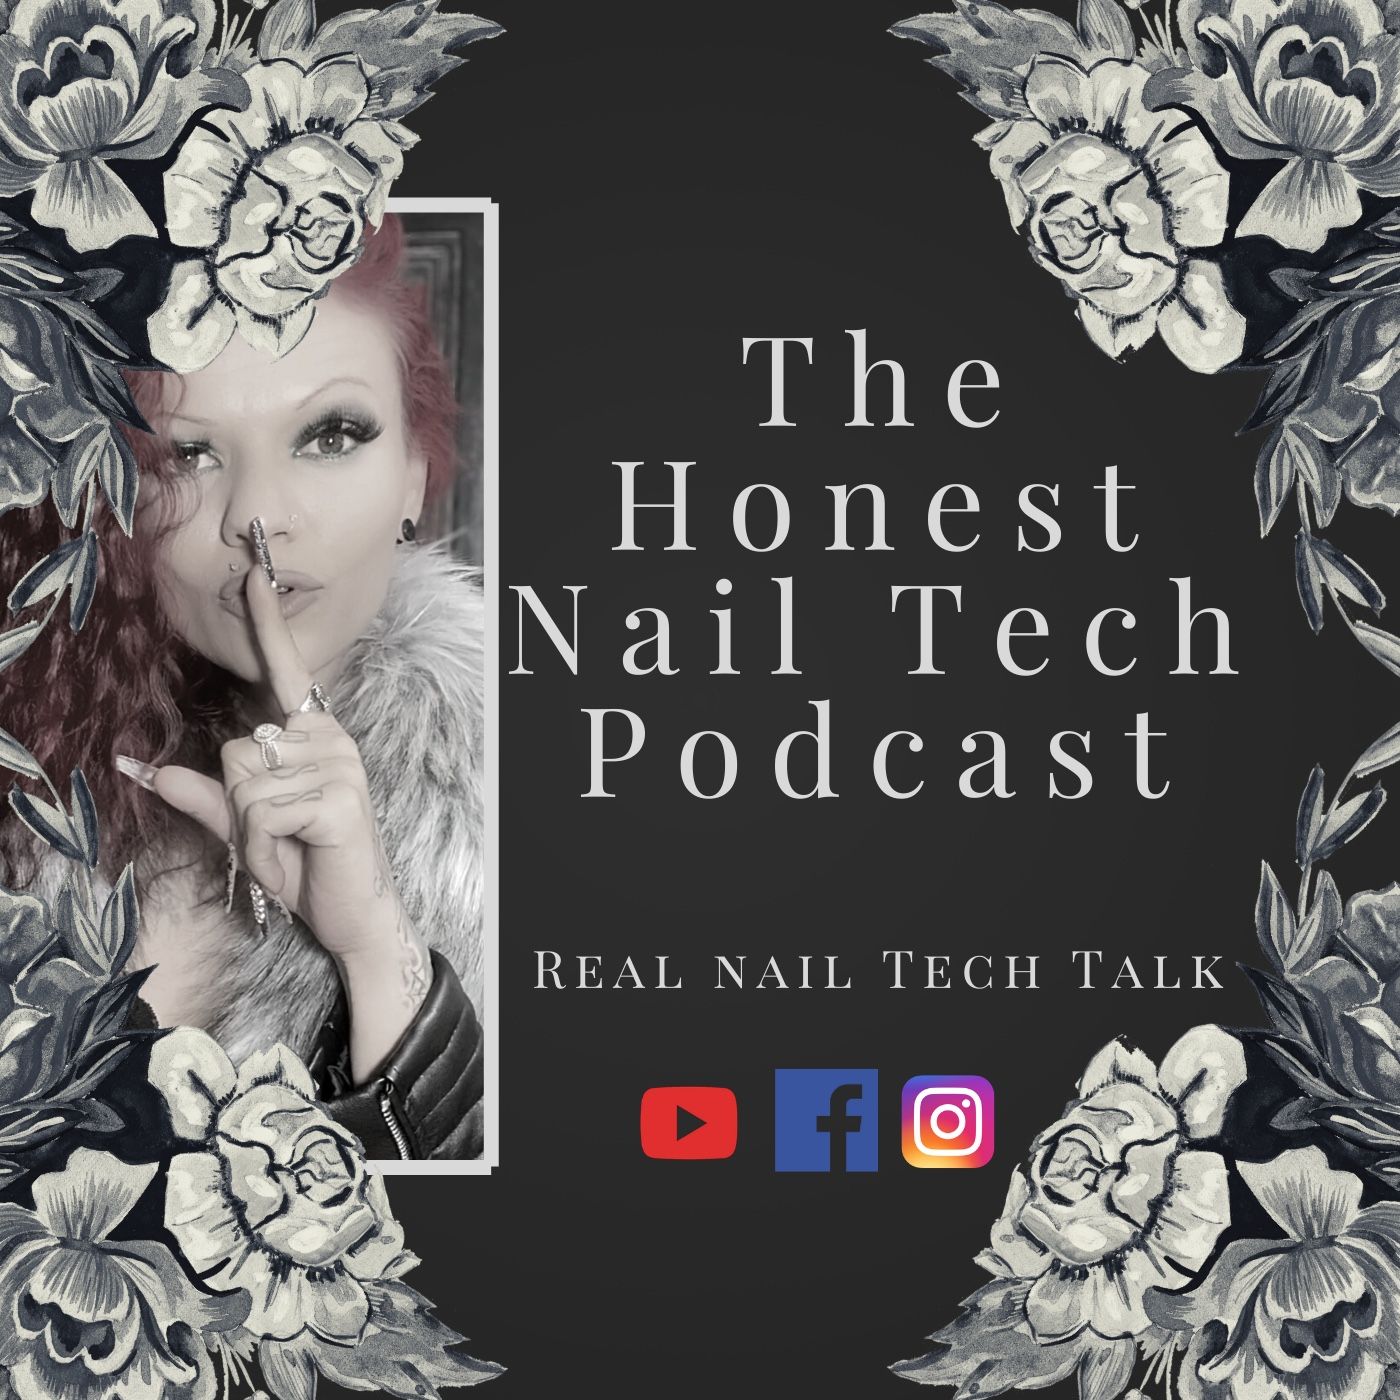 The Honest Nail Tech Podcast